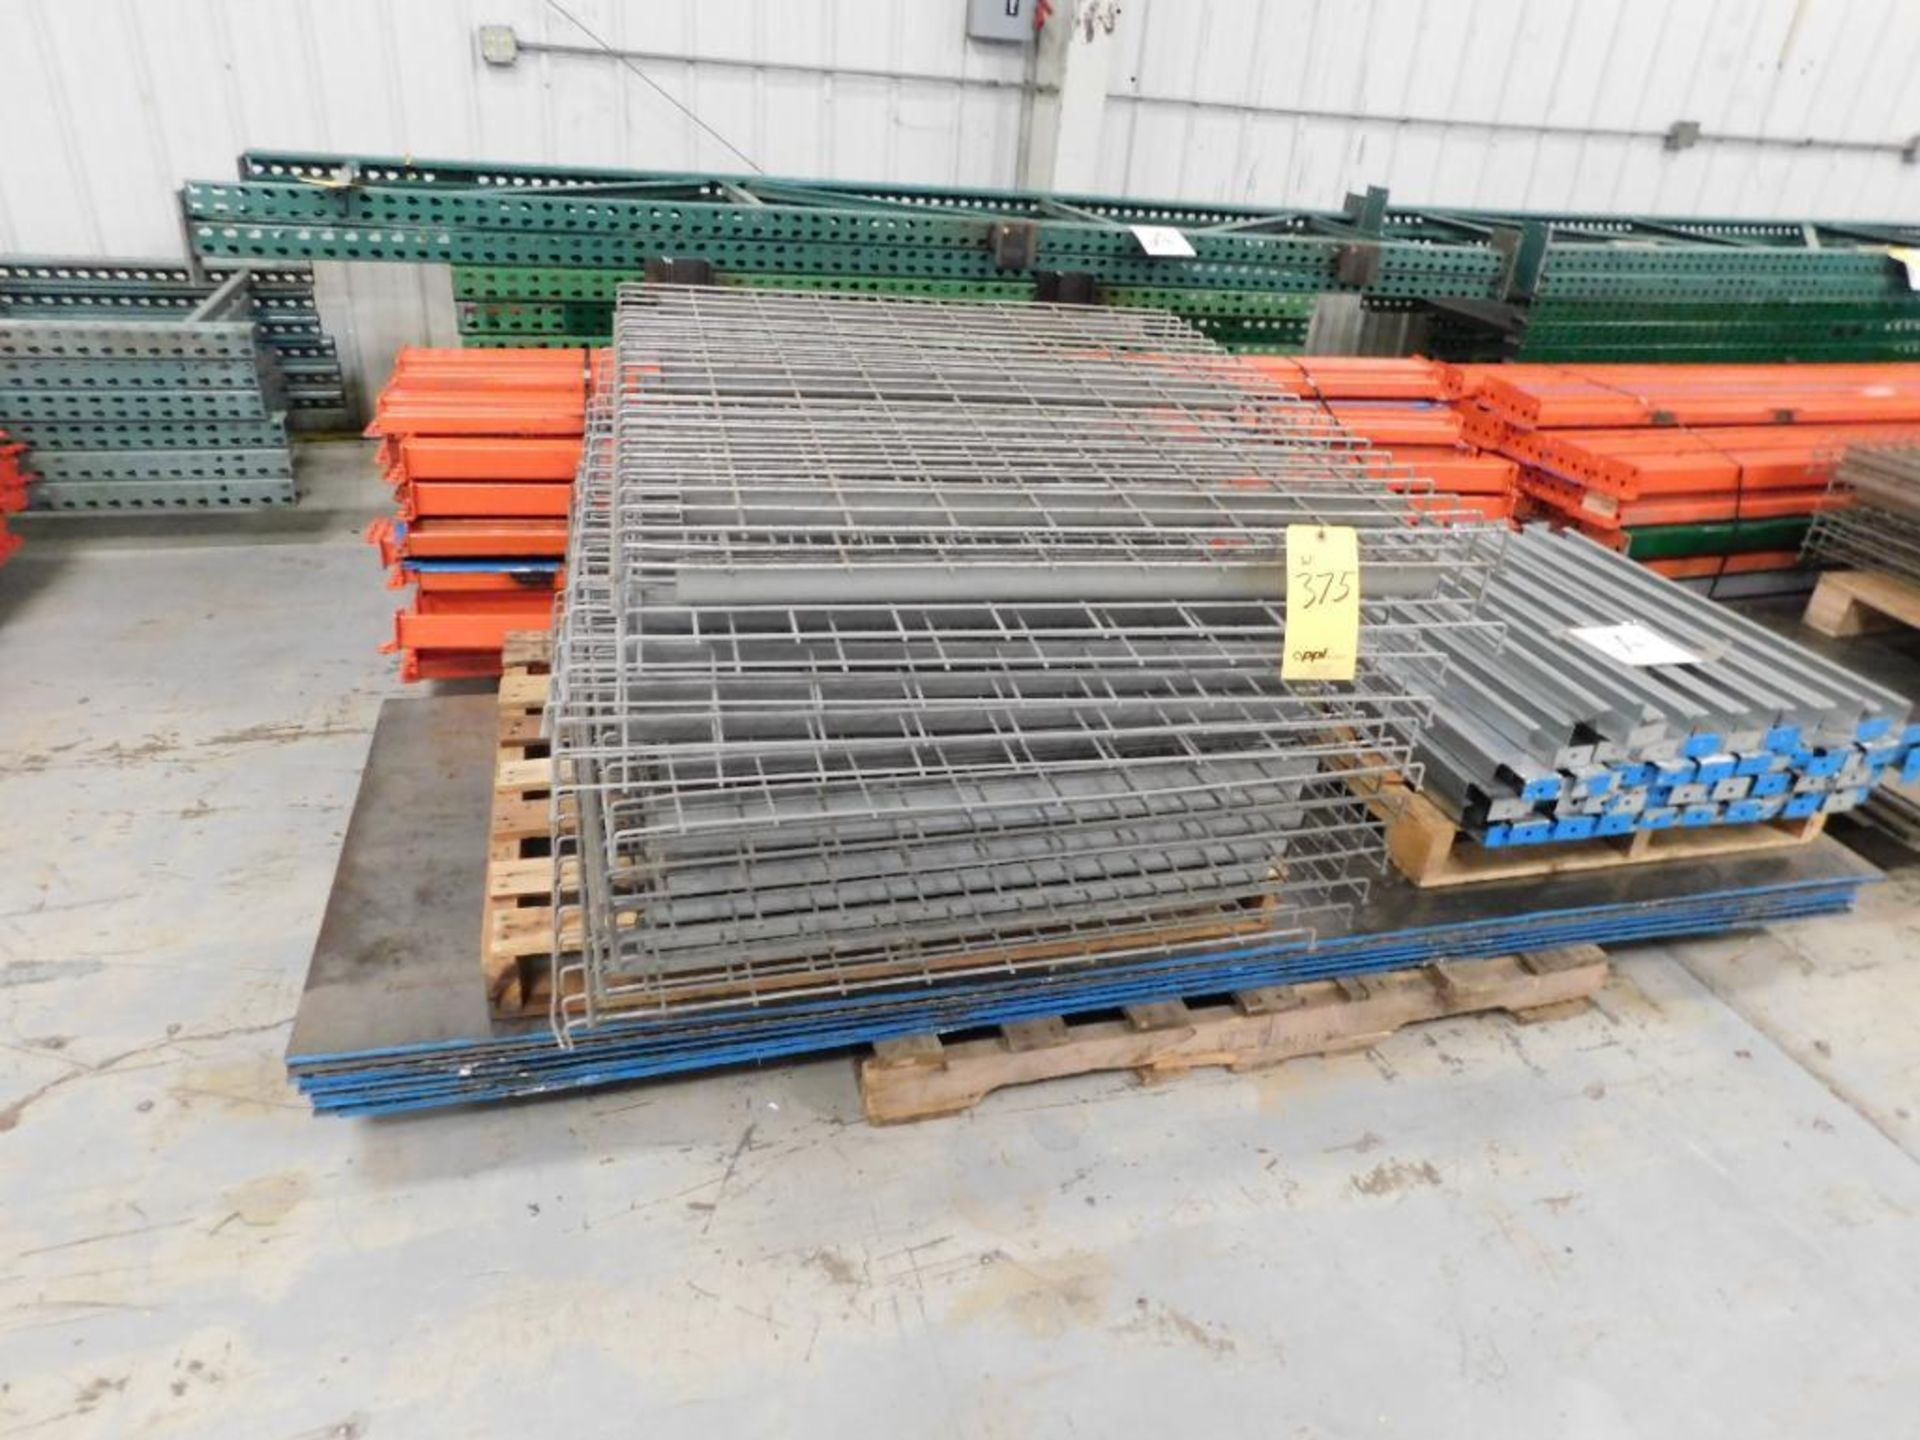 LOT: Pallet Rack, (8) 8' Uprights, (2) 12' Uprights, (35) 8' Crossbars, Plate Steel and Wire Decking